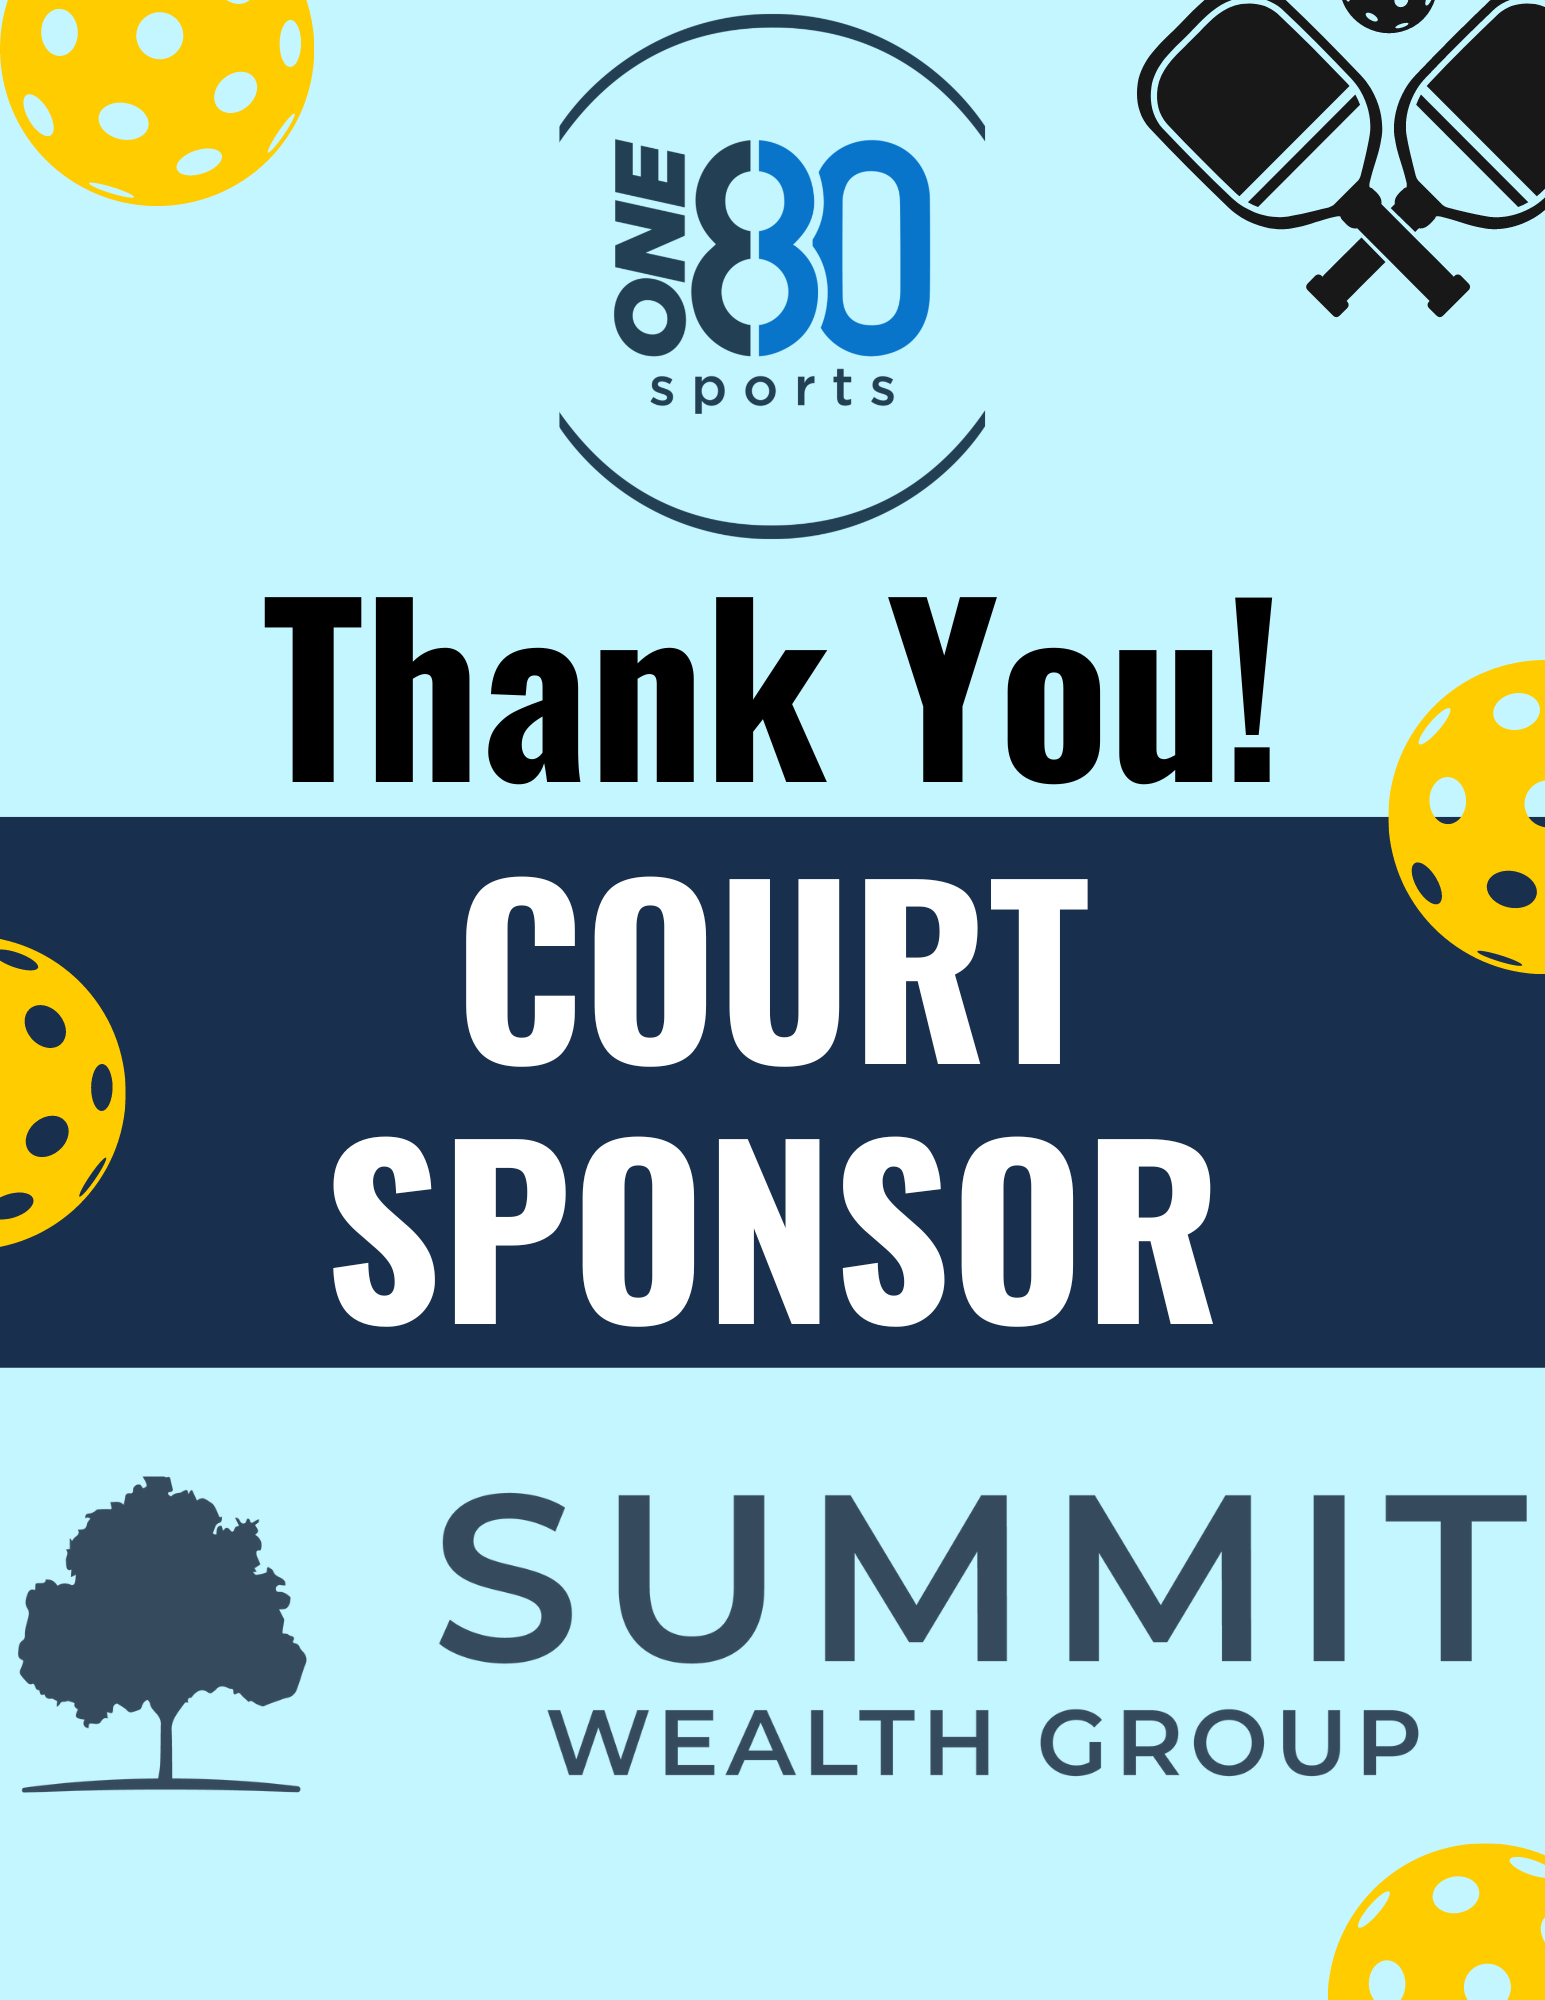 Summit Wealth Group - court sponsor.png